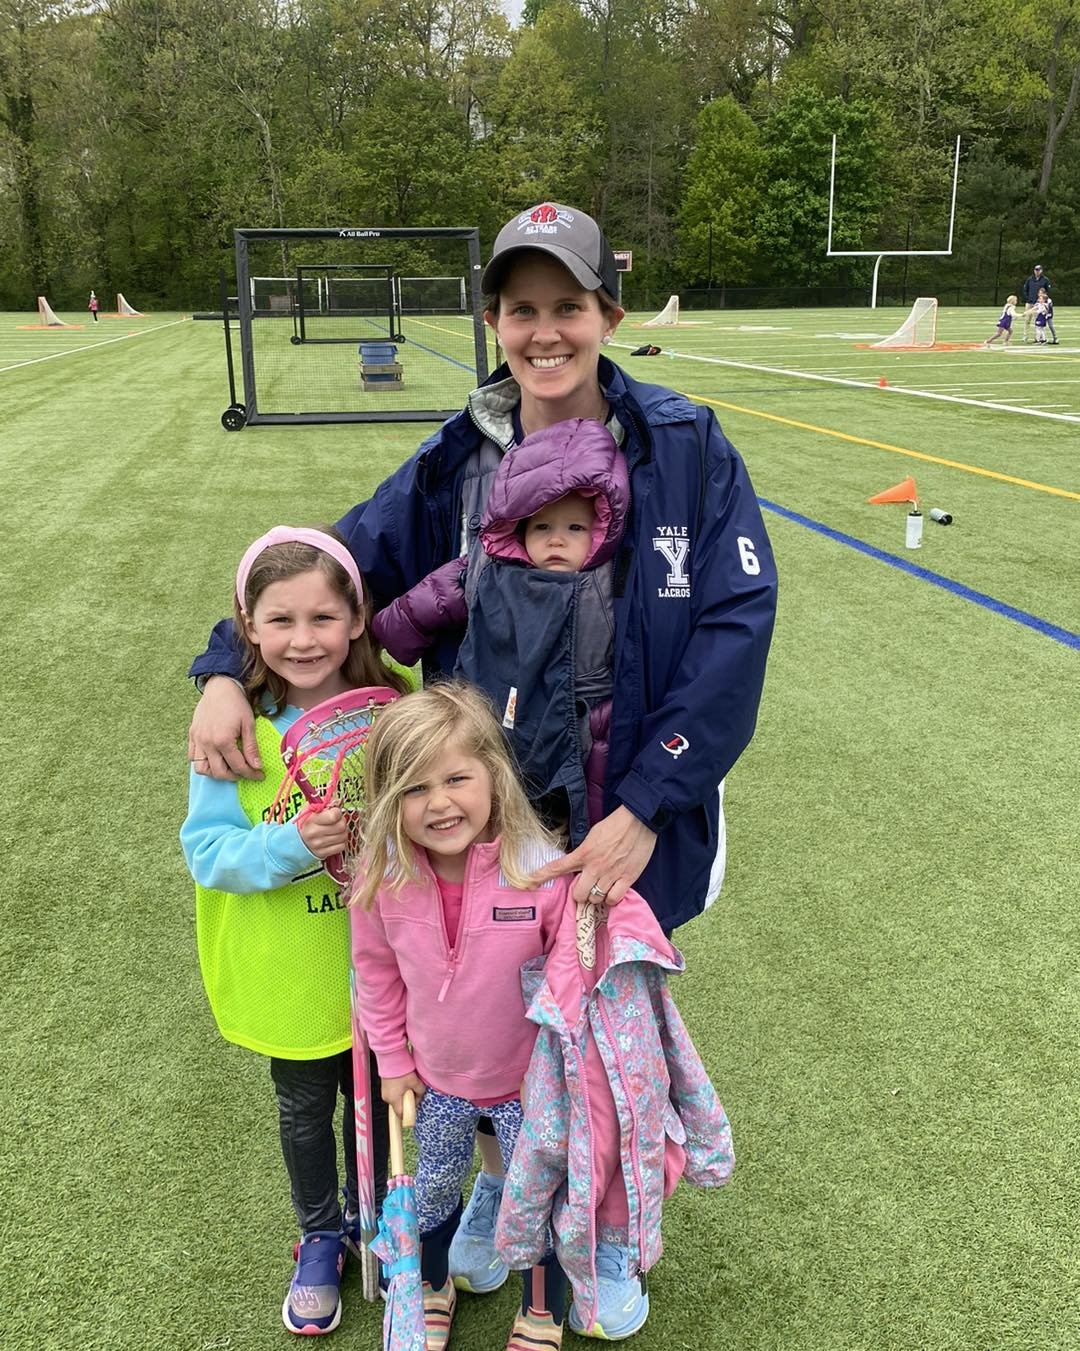 Happy Mother&rsquo;s Day to all the amazing Mom&rsquo;s who support GYL.  It will be a fun day on the fields this afternoon. We will post more photos of our great House League coaches throughout the day! 💐❤️🥍